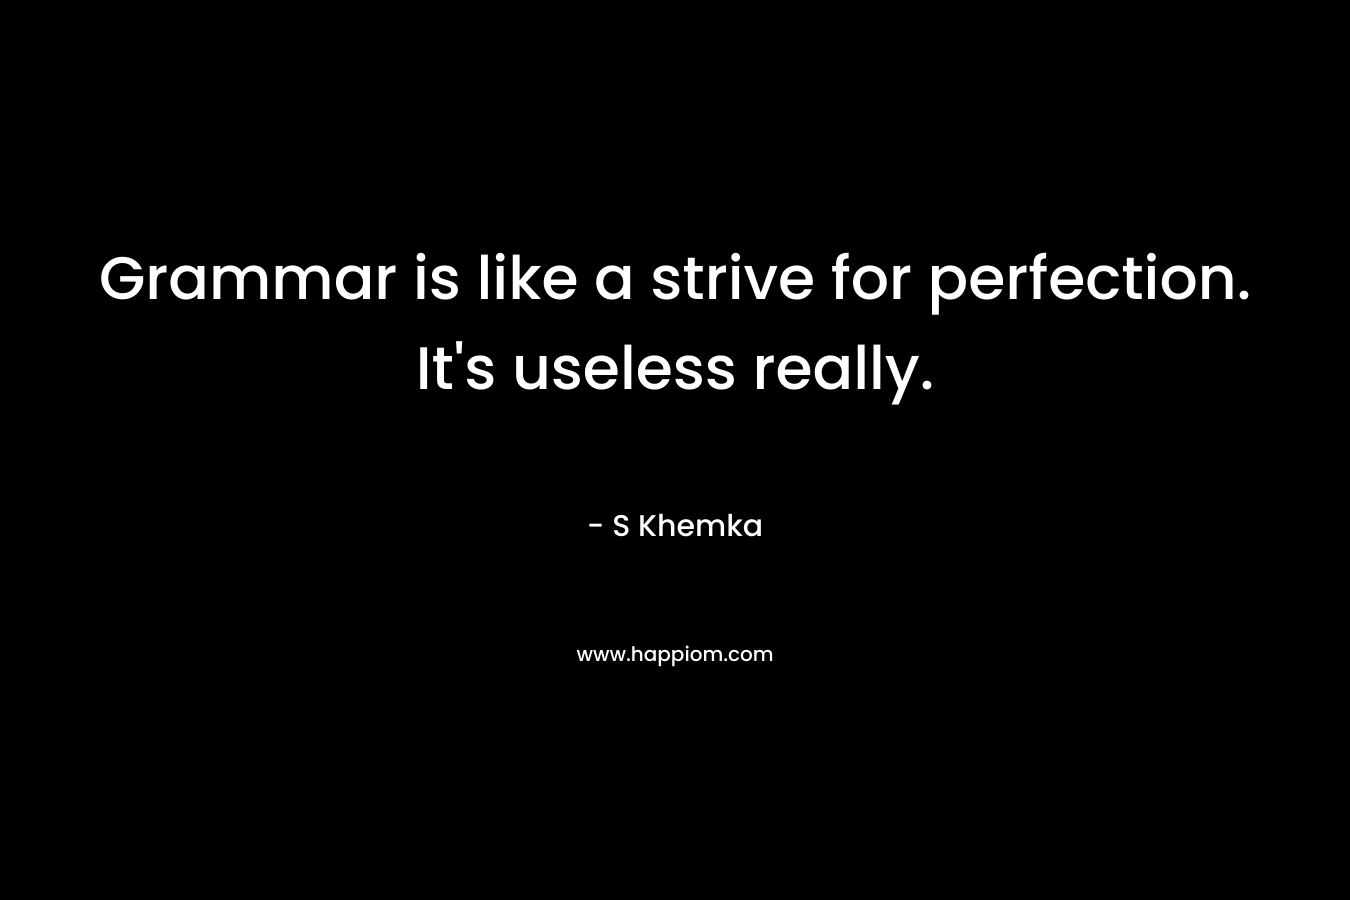 Grammar is like a strive for perfection. It's useless really.